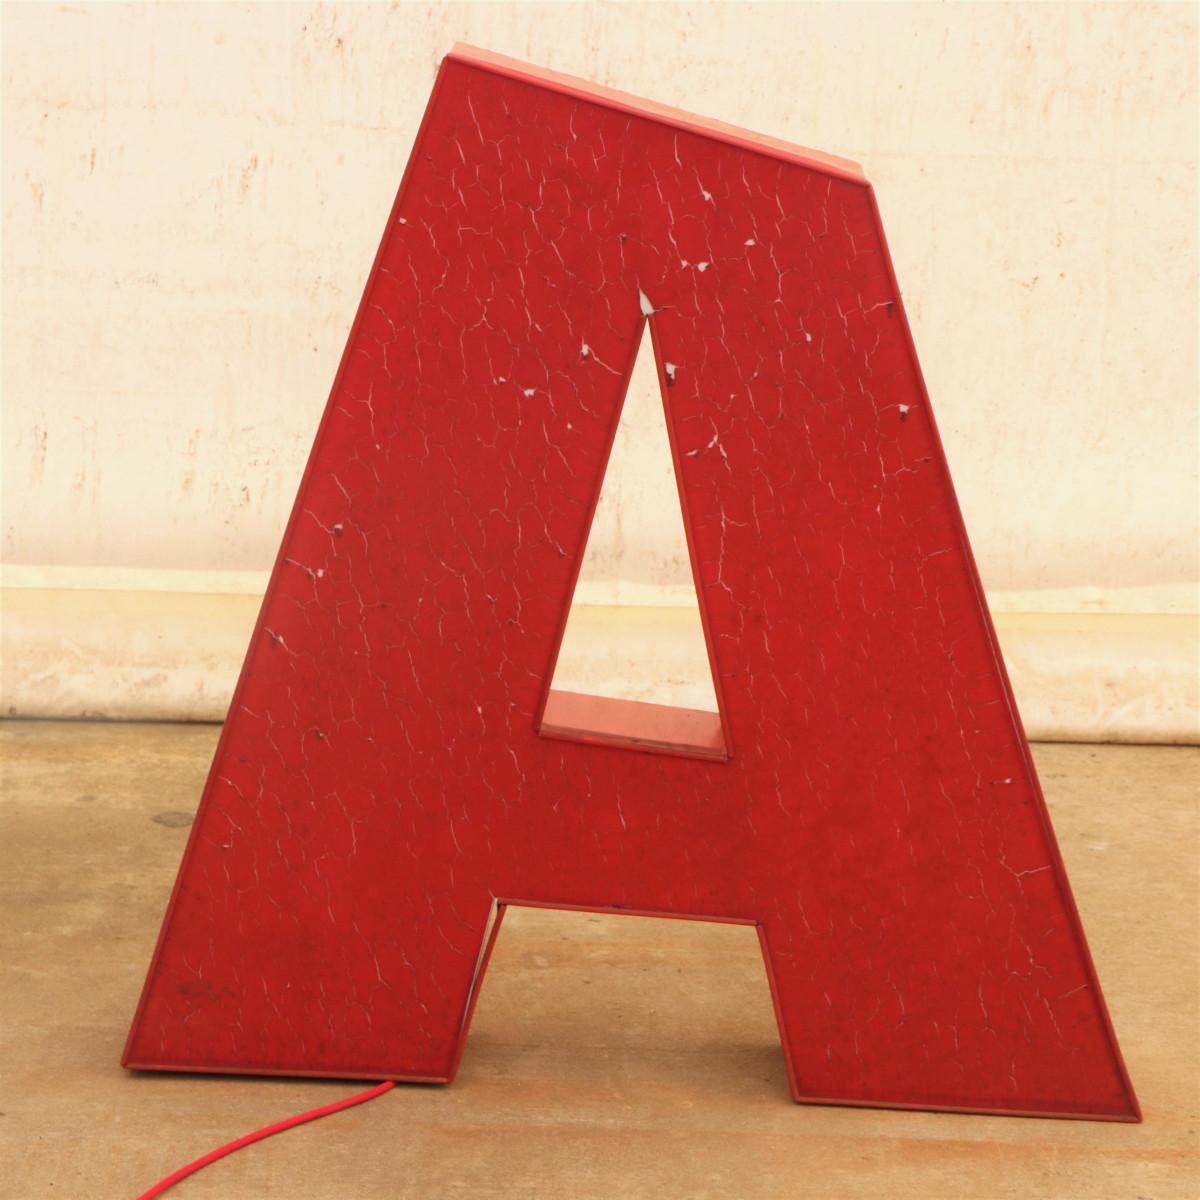 This advertising illuminated letter represents the ever so popular Vintage wall art. You can use the letter on the wall but better as a floor lamp in the room. The lamp shines in darkness or semi darkness.
This vintage industrial illuminated letter